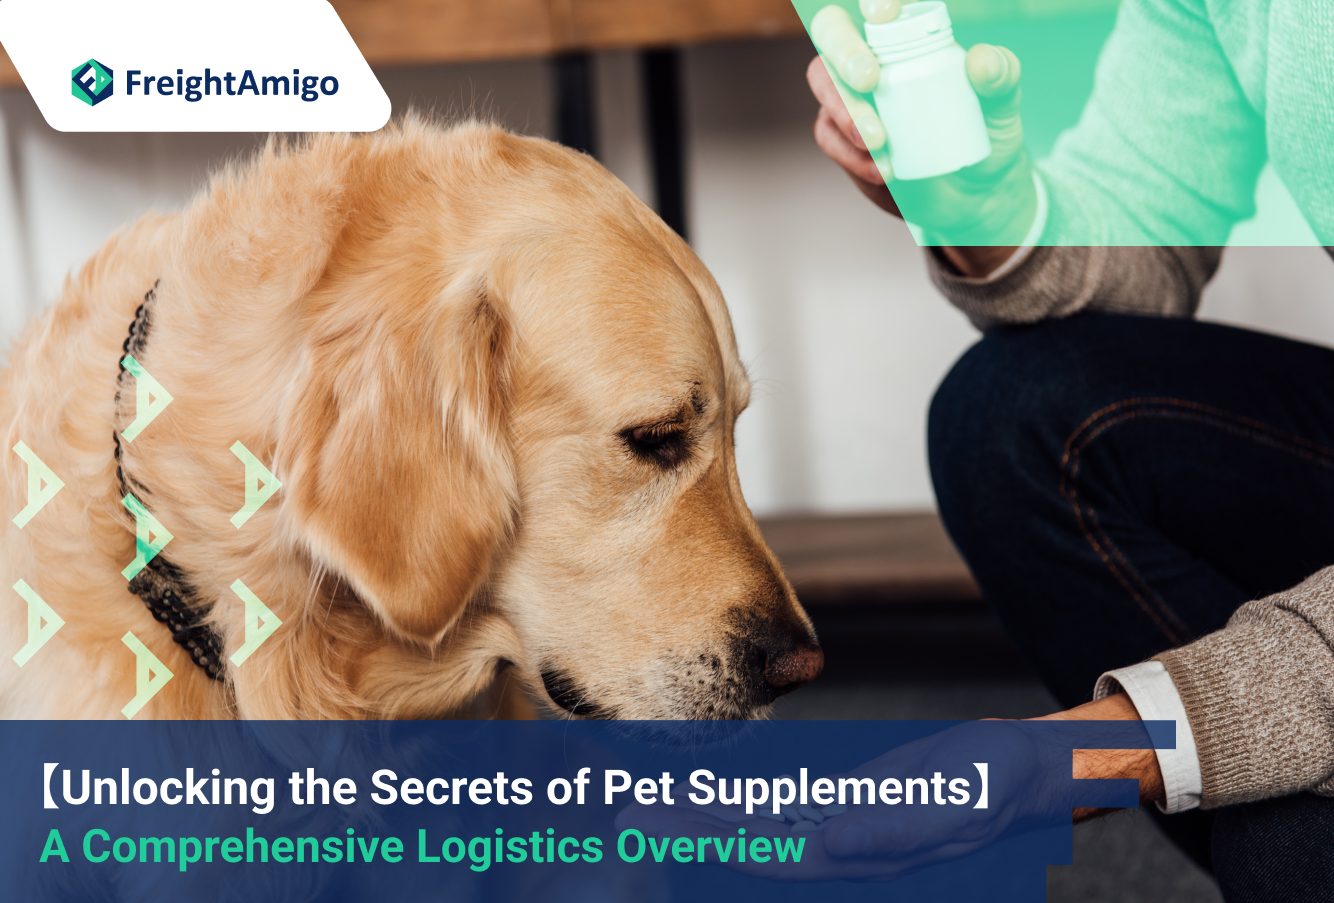 How to Ship Pet Supplements: A Comprehensive Logistics Overview